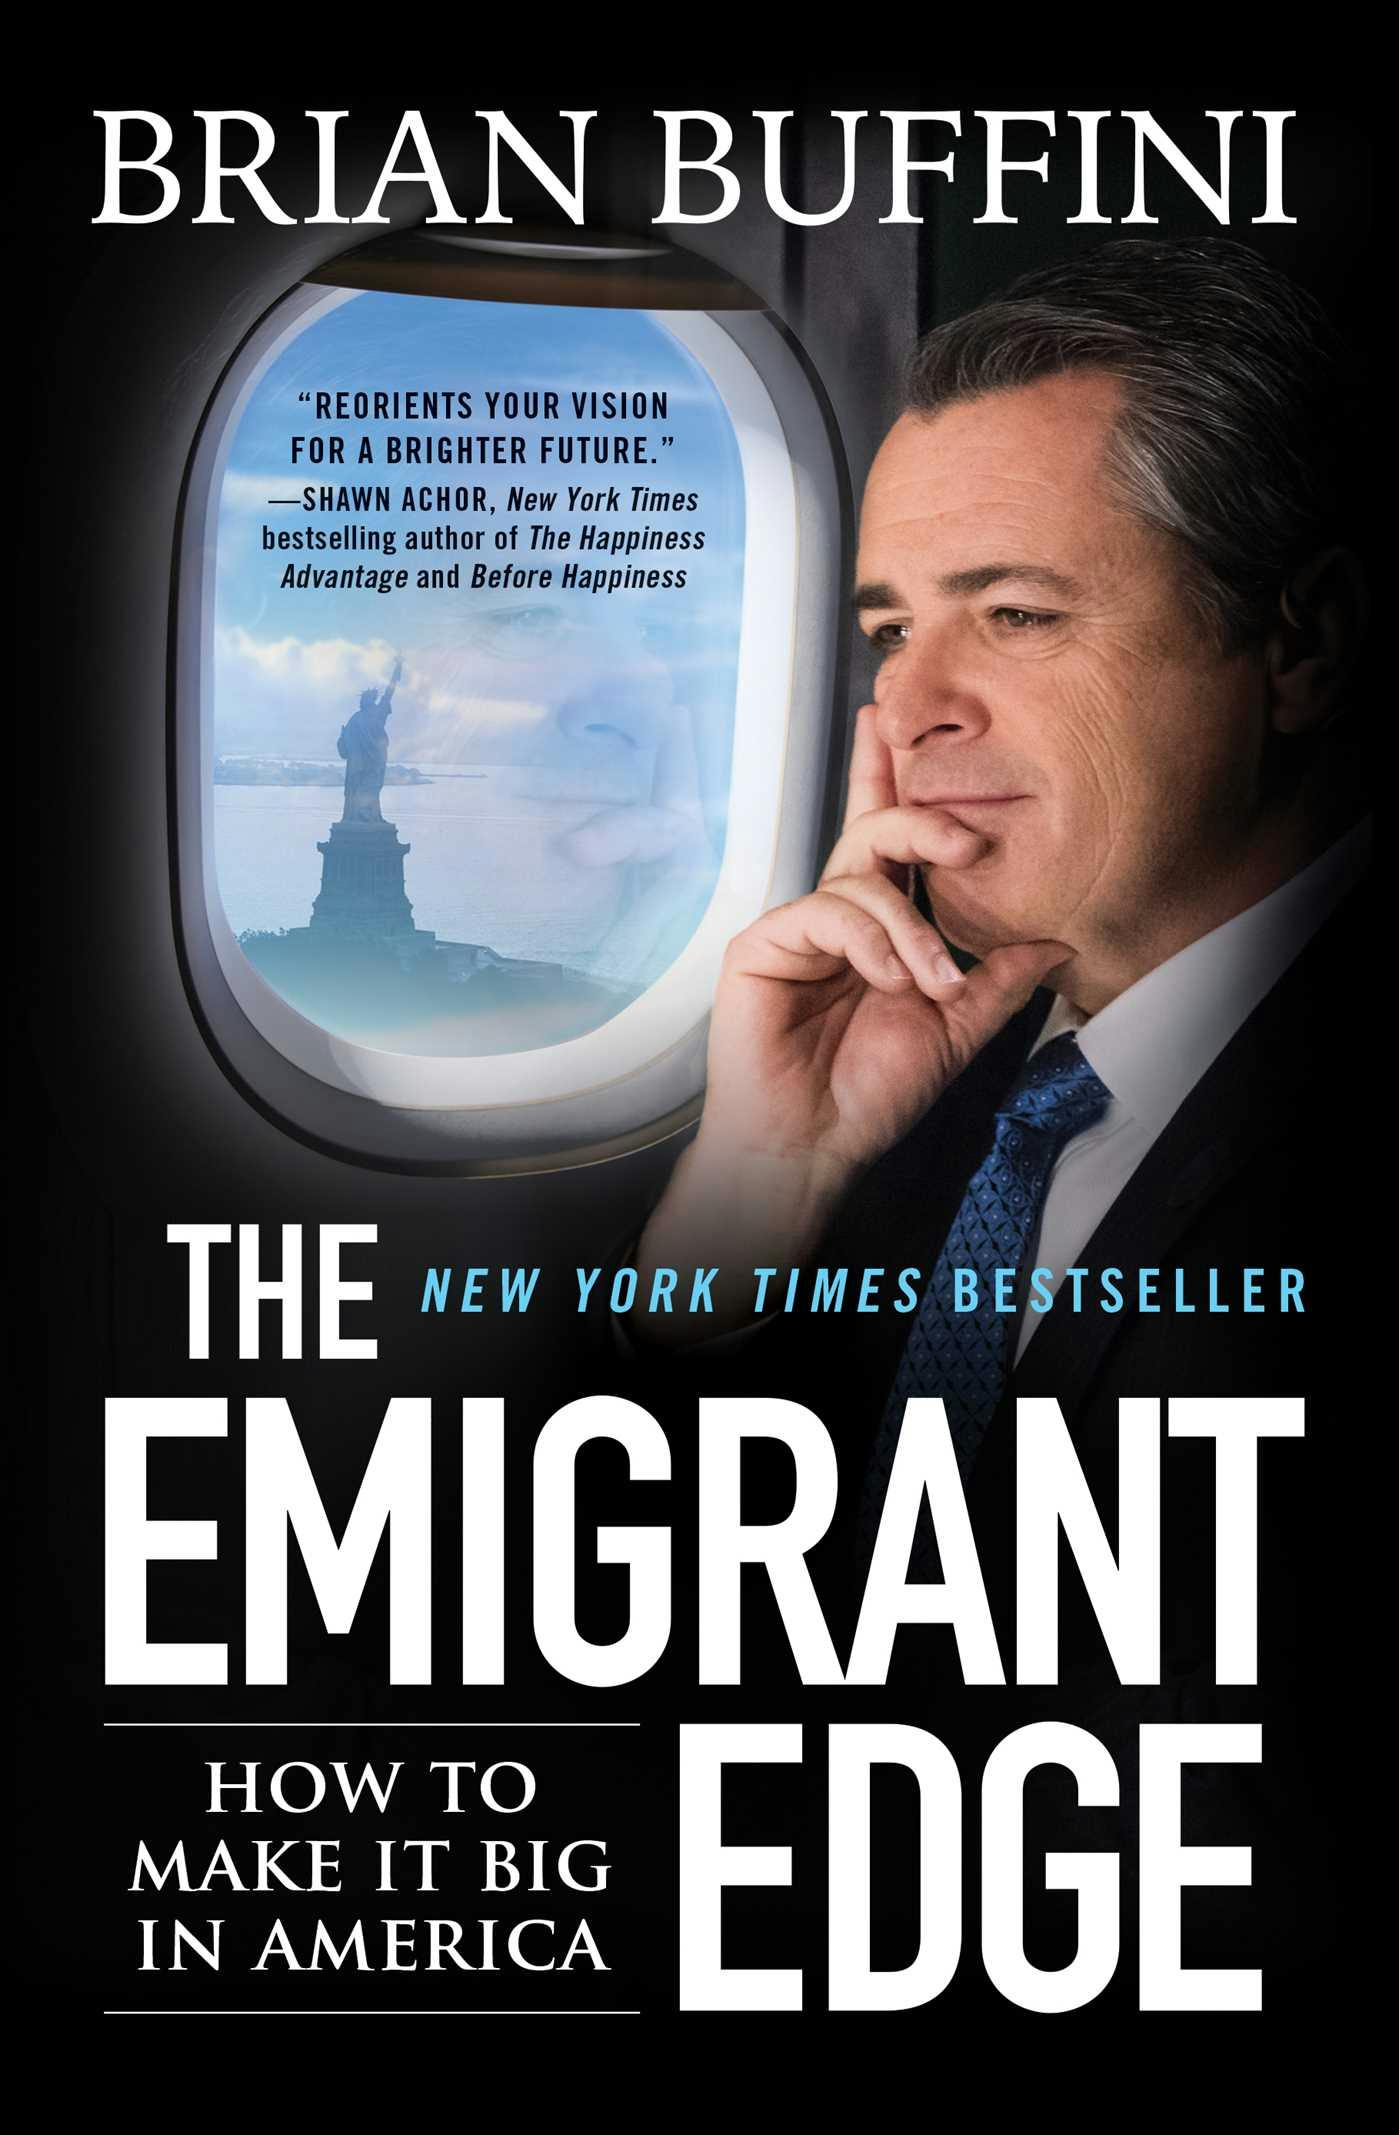 The Emigrant Edge: How to Make It Big in America - undefined